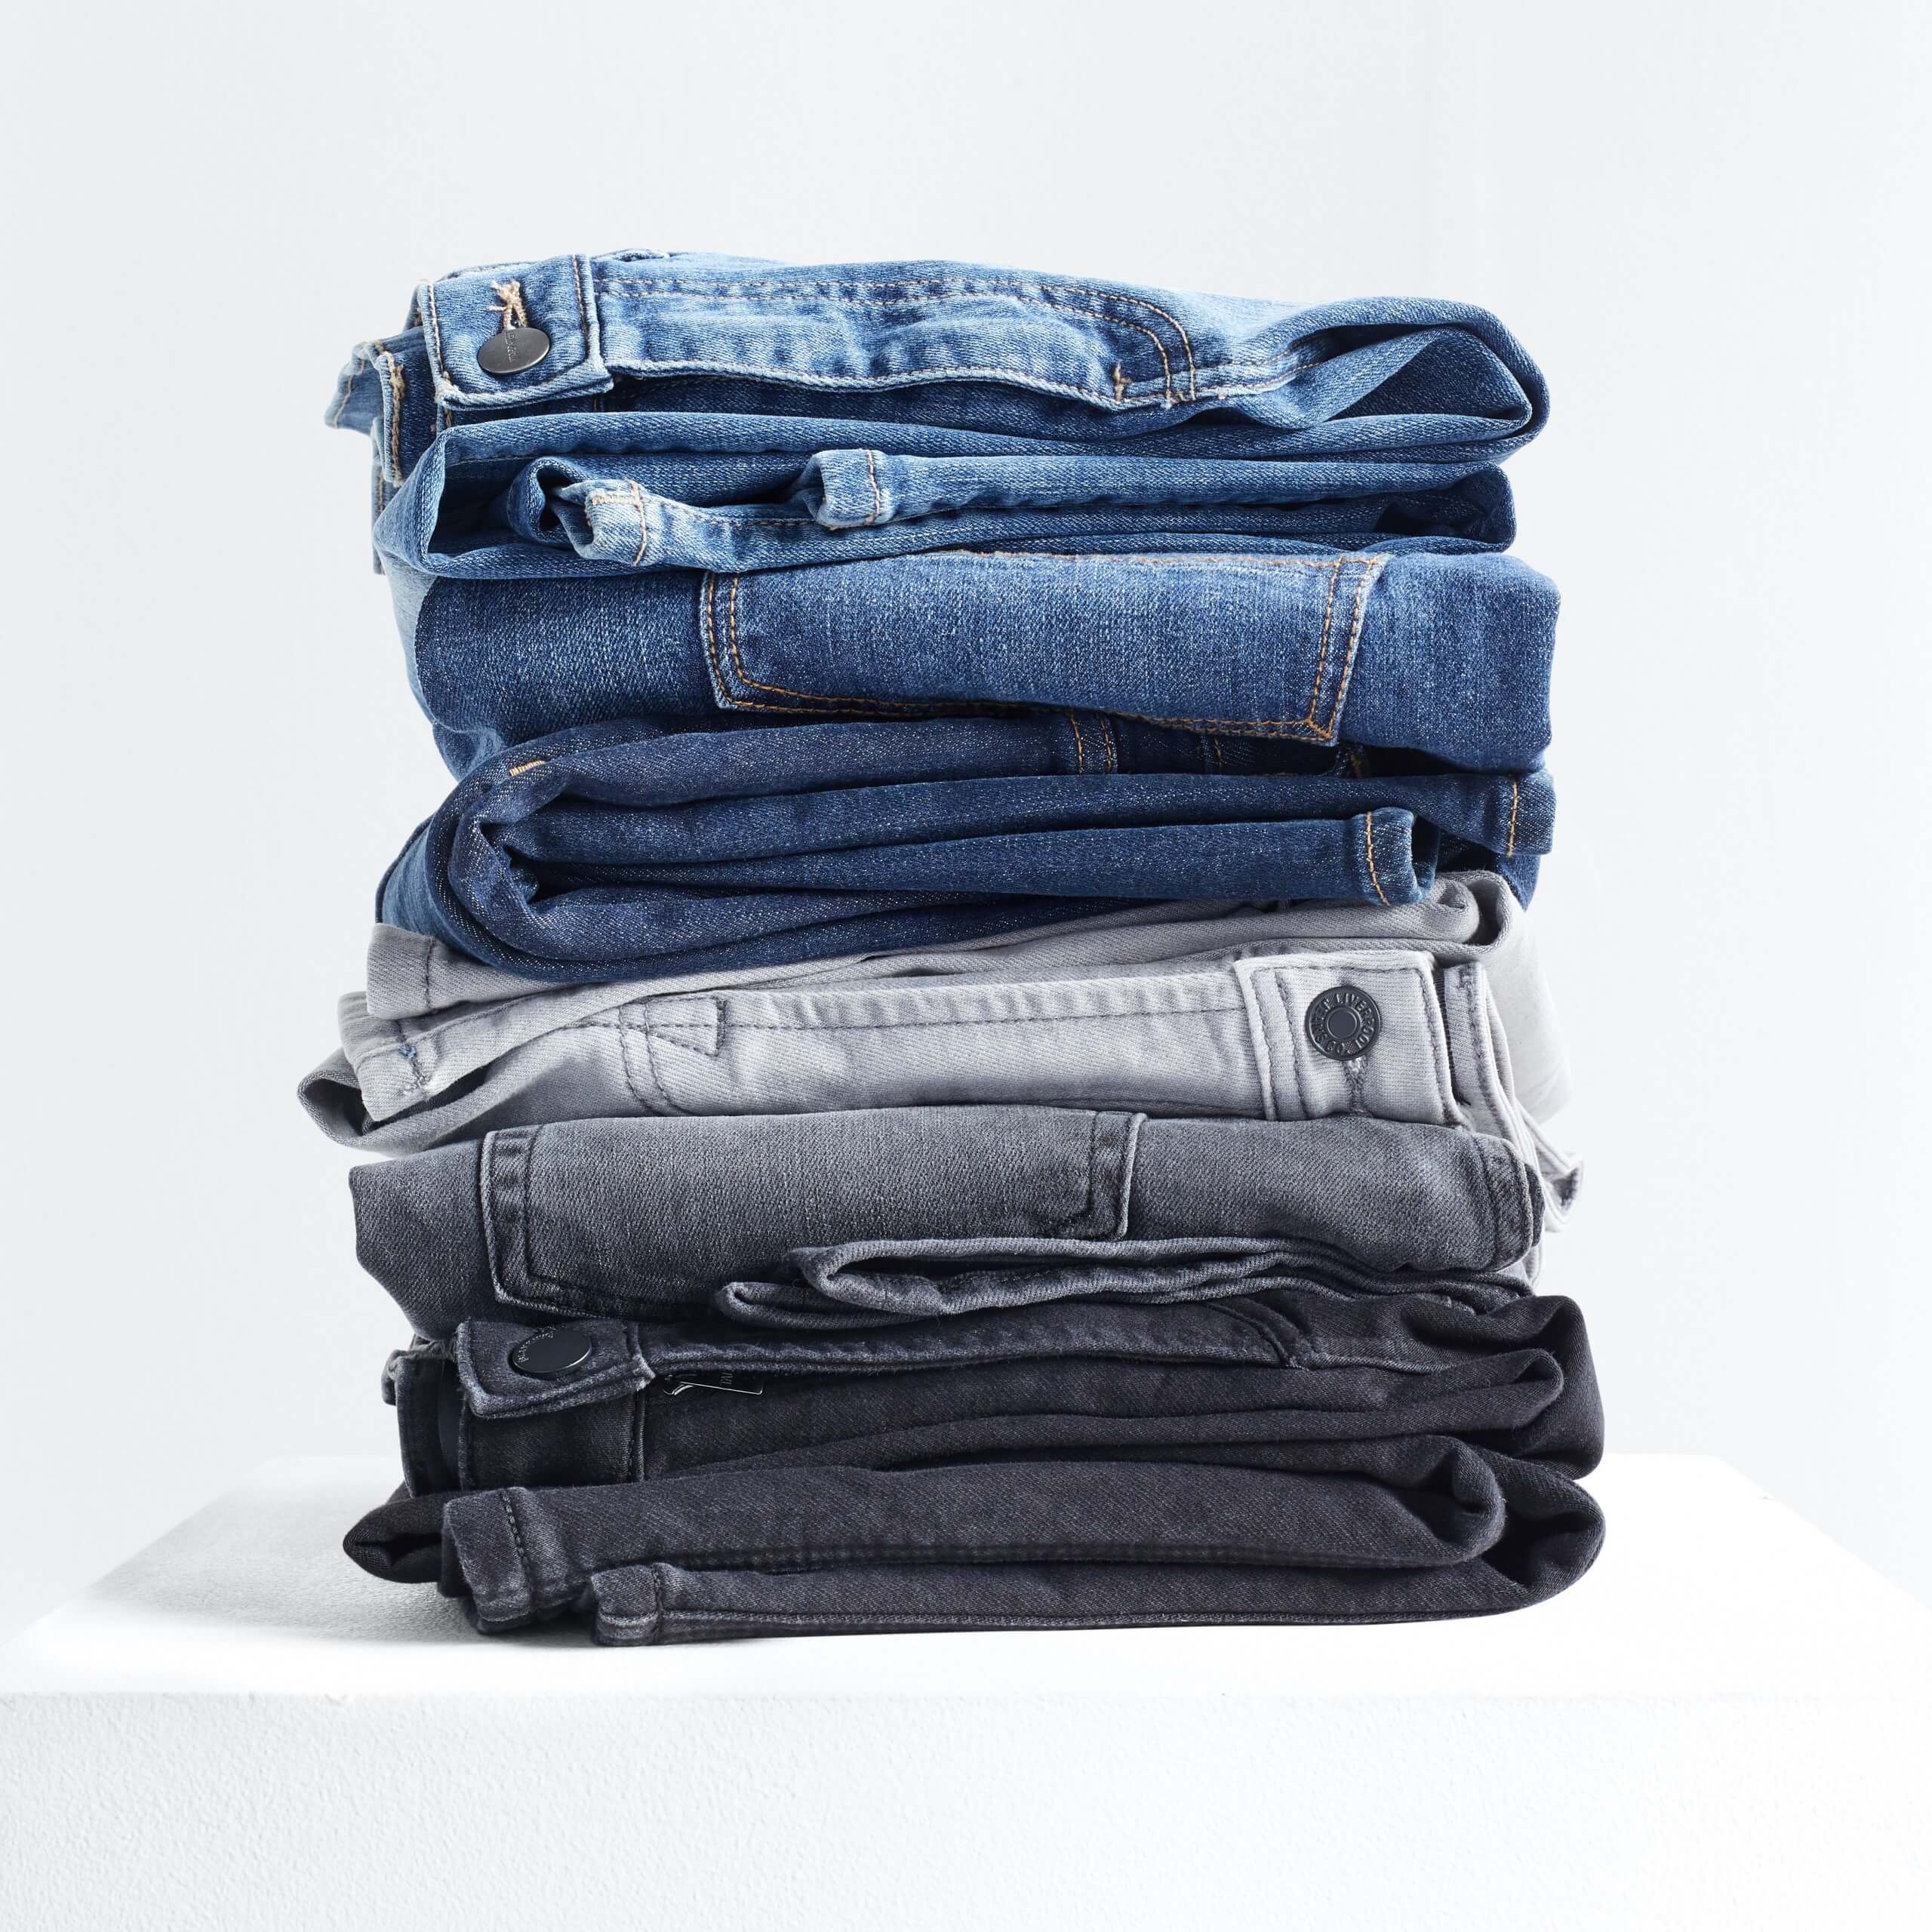 vi stacked jeans  Stacked jeans outfit men, Jeans outfit men